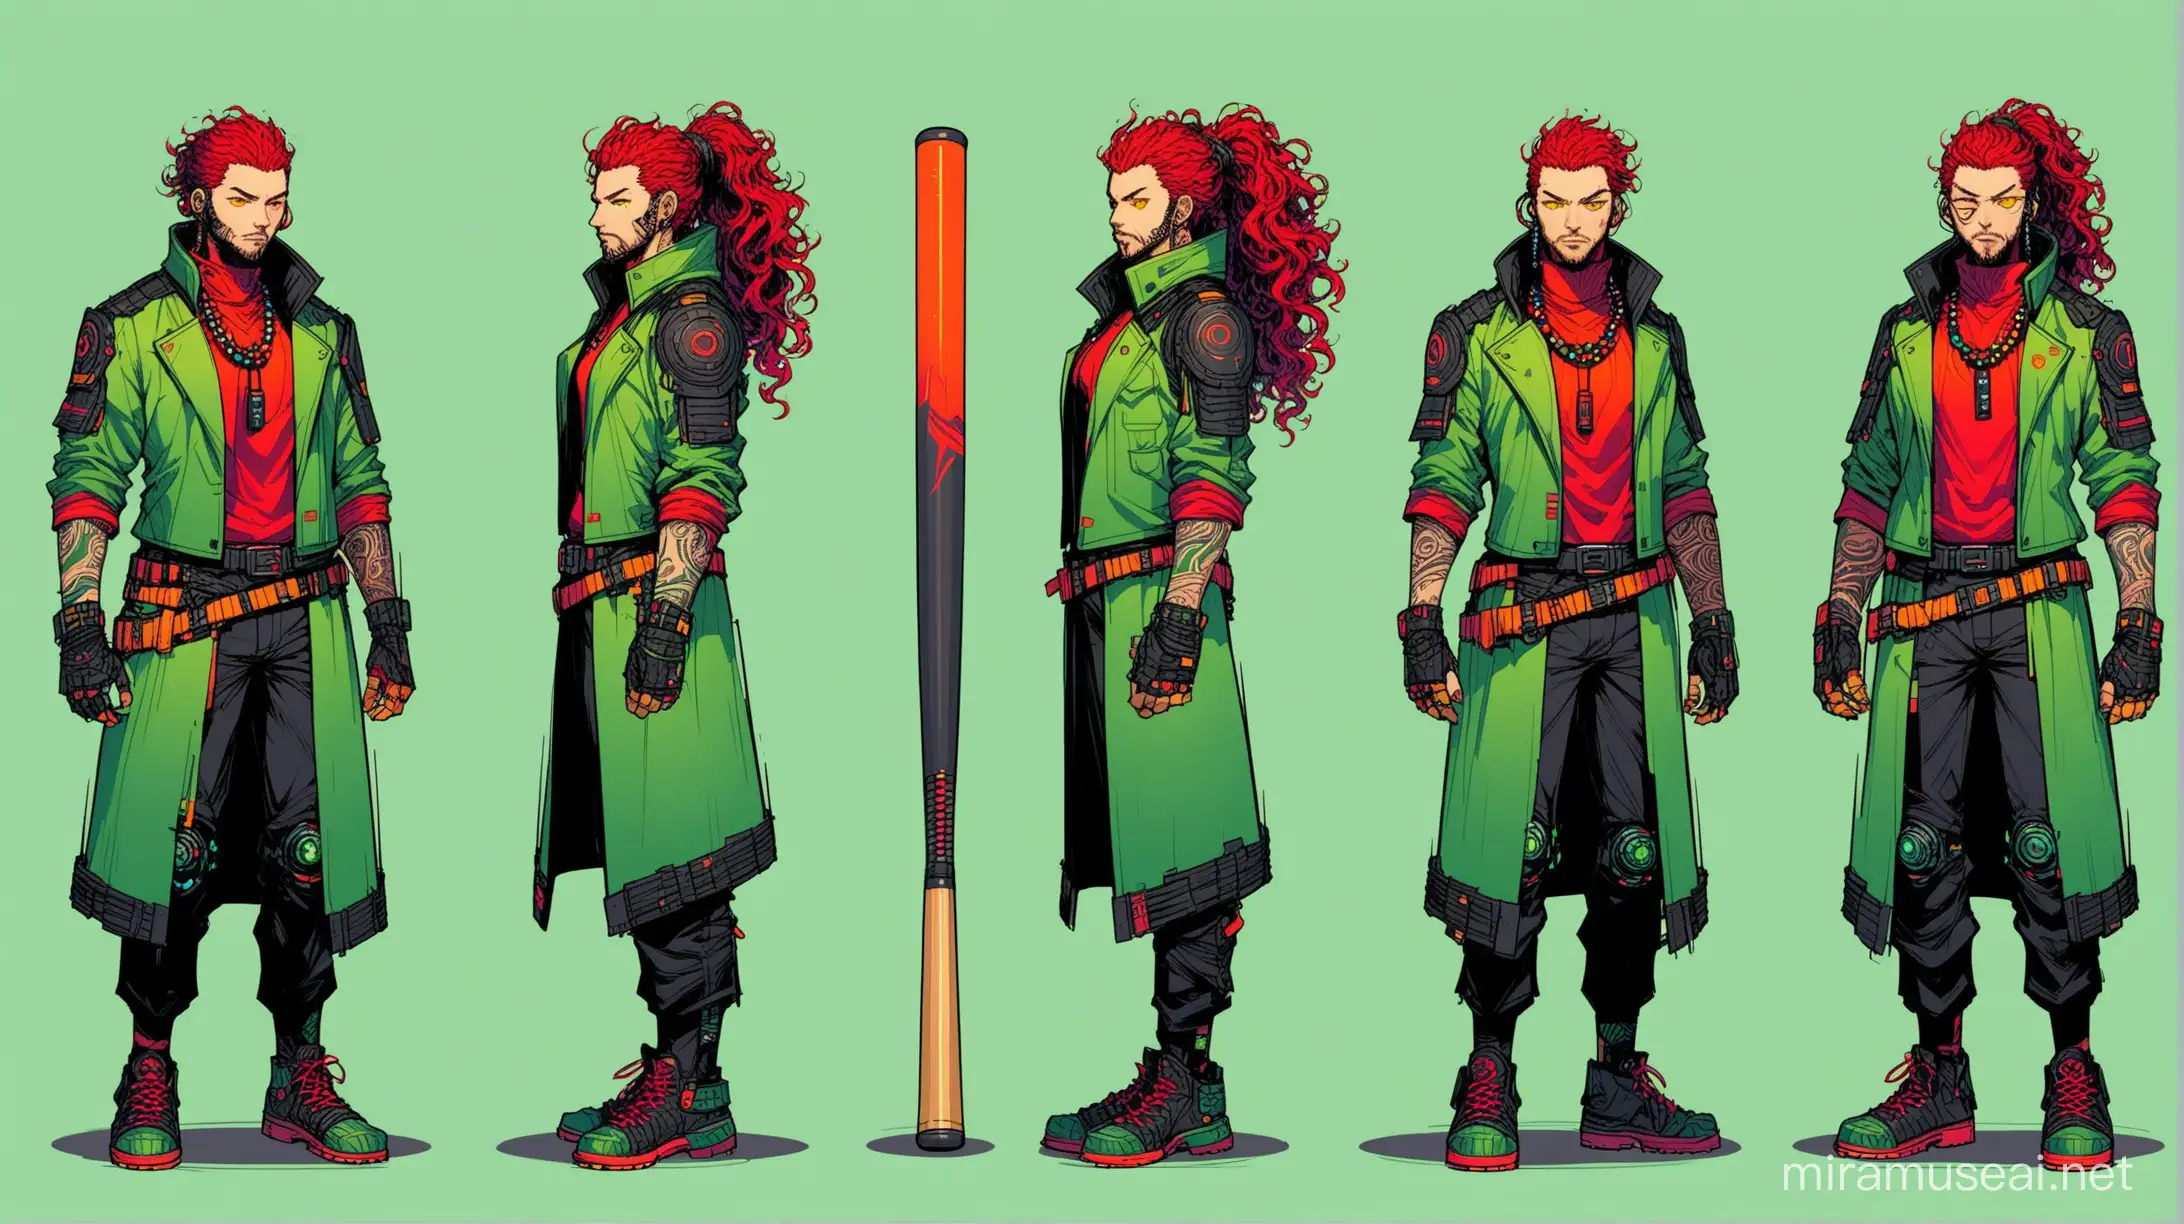 Concept art, sage details, group of characters, tailored jacket with many facets, with belt inserts, with armor elements, concept art, character variants, many details, baseball bat, sage background, granular style, full body, yellow eyes, jacket with belts and wool collar, cyberpunk, neck beads, red aura, man, greenish curly hair in a ponytail, intricate details.